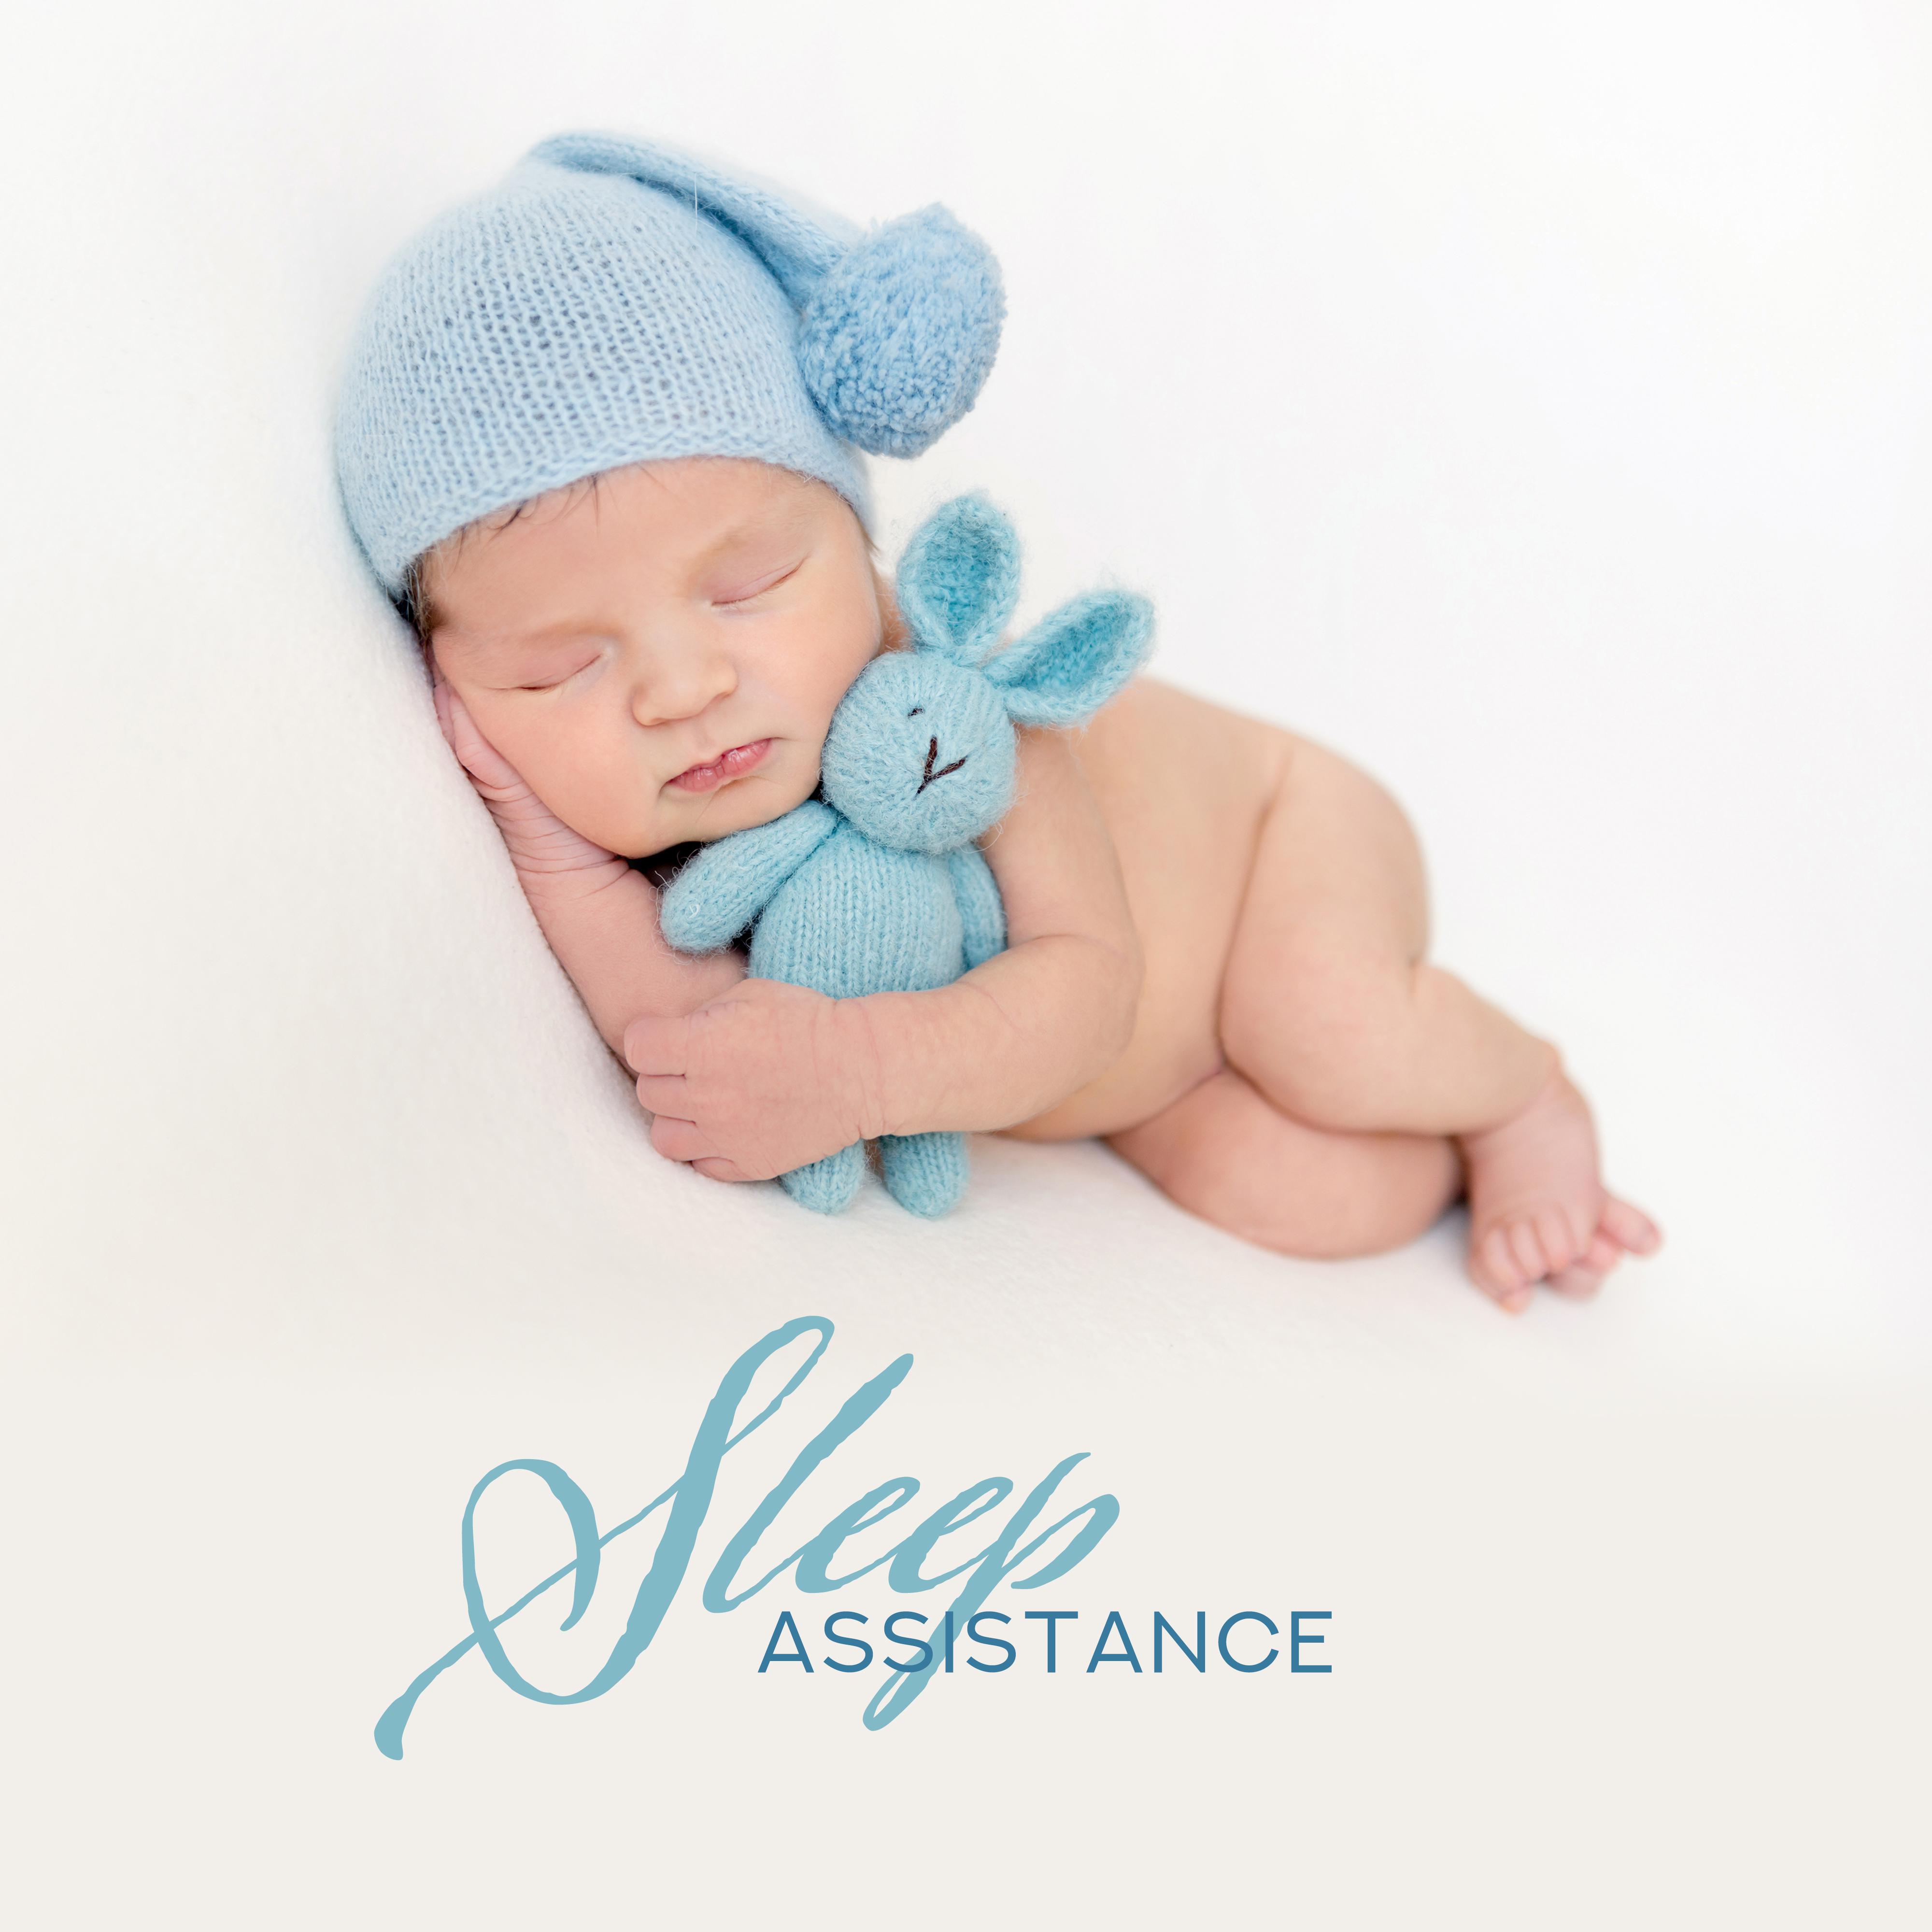 Sleep Assistance: Musical Help for Insomnia and Sleep Problems, Gentle Music That’ll Help You Fall Asleep